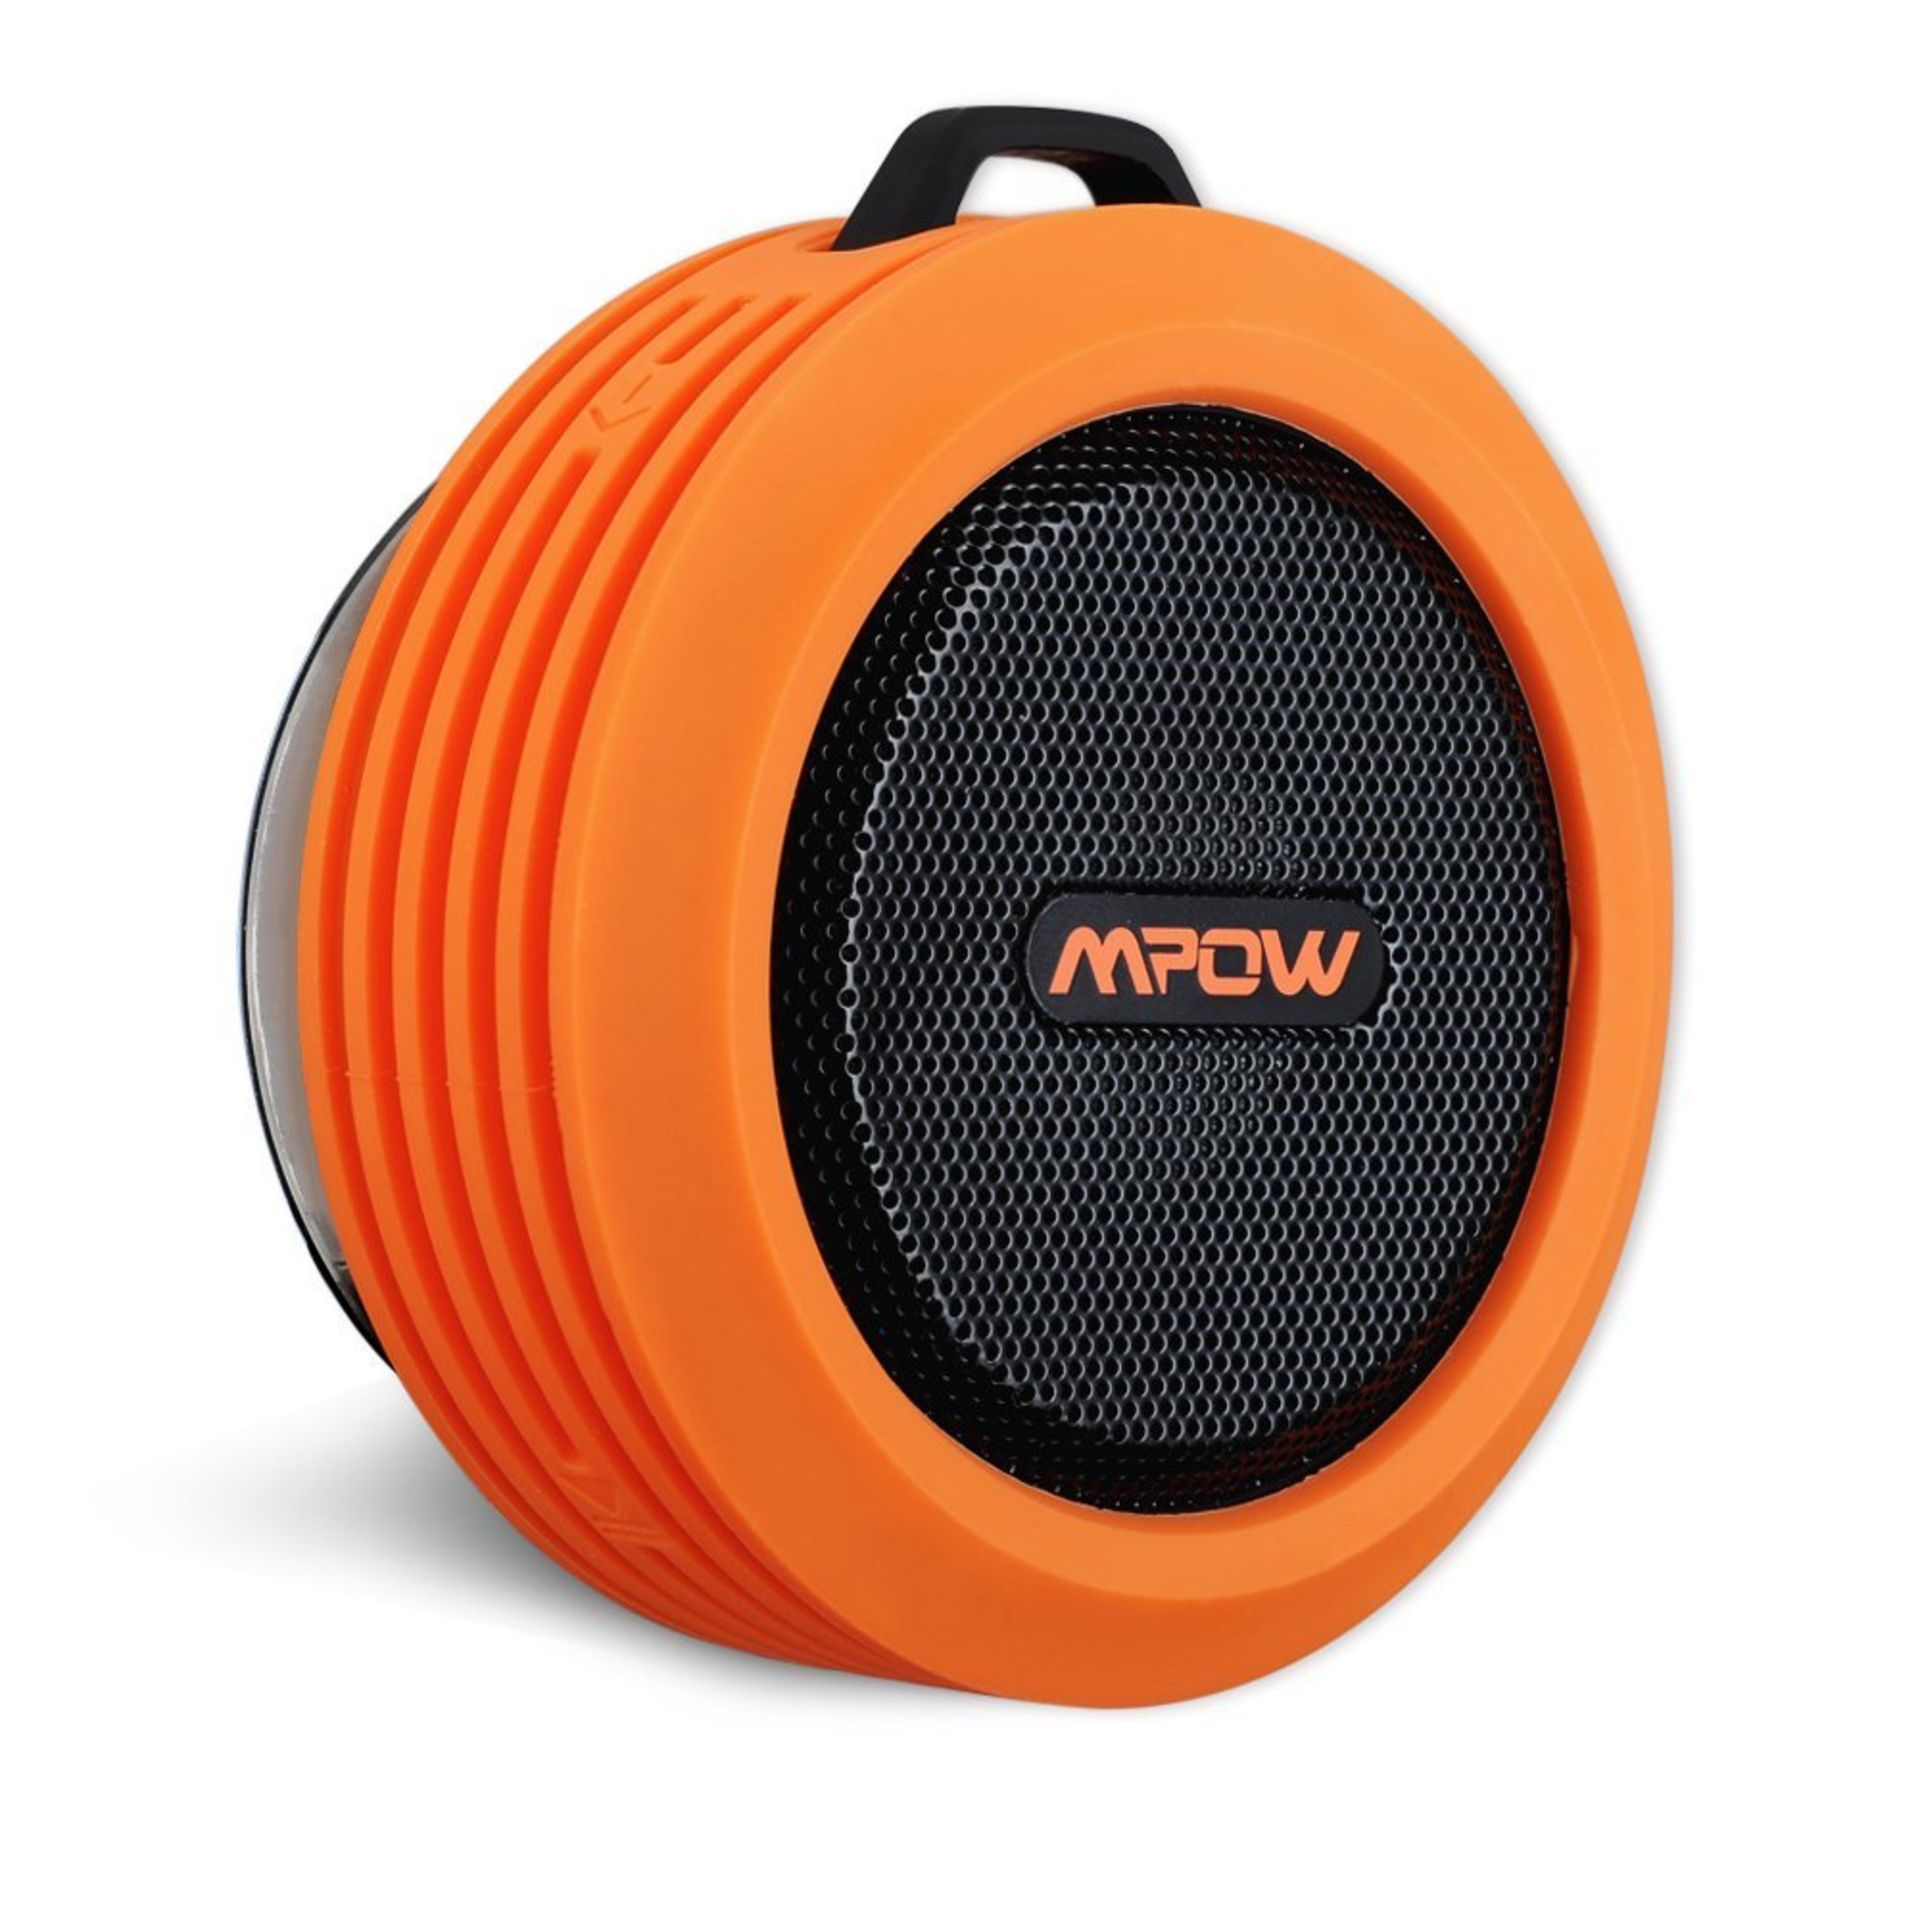 V Grade A Bluetooth Wirless Speaker - 10000 mAh battery - Micro USB Included - Amazon Price £20.09